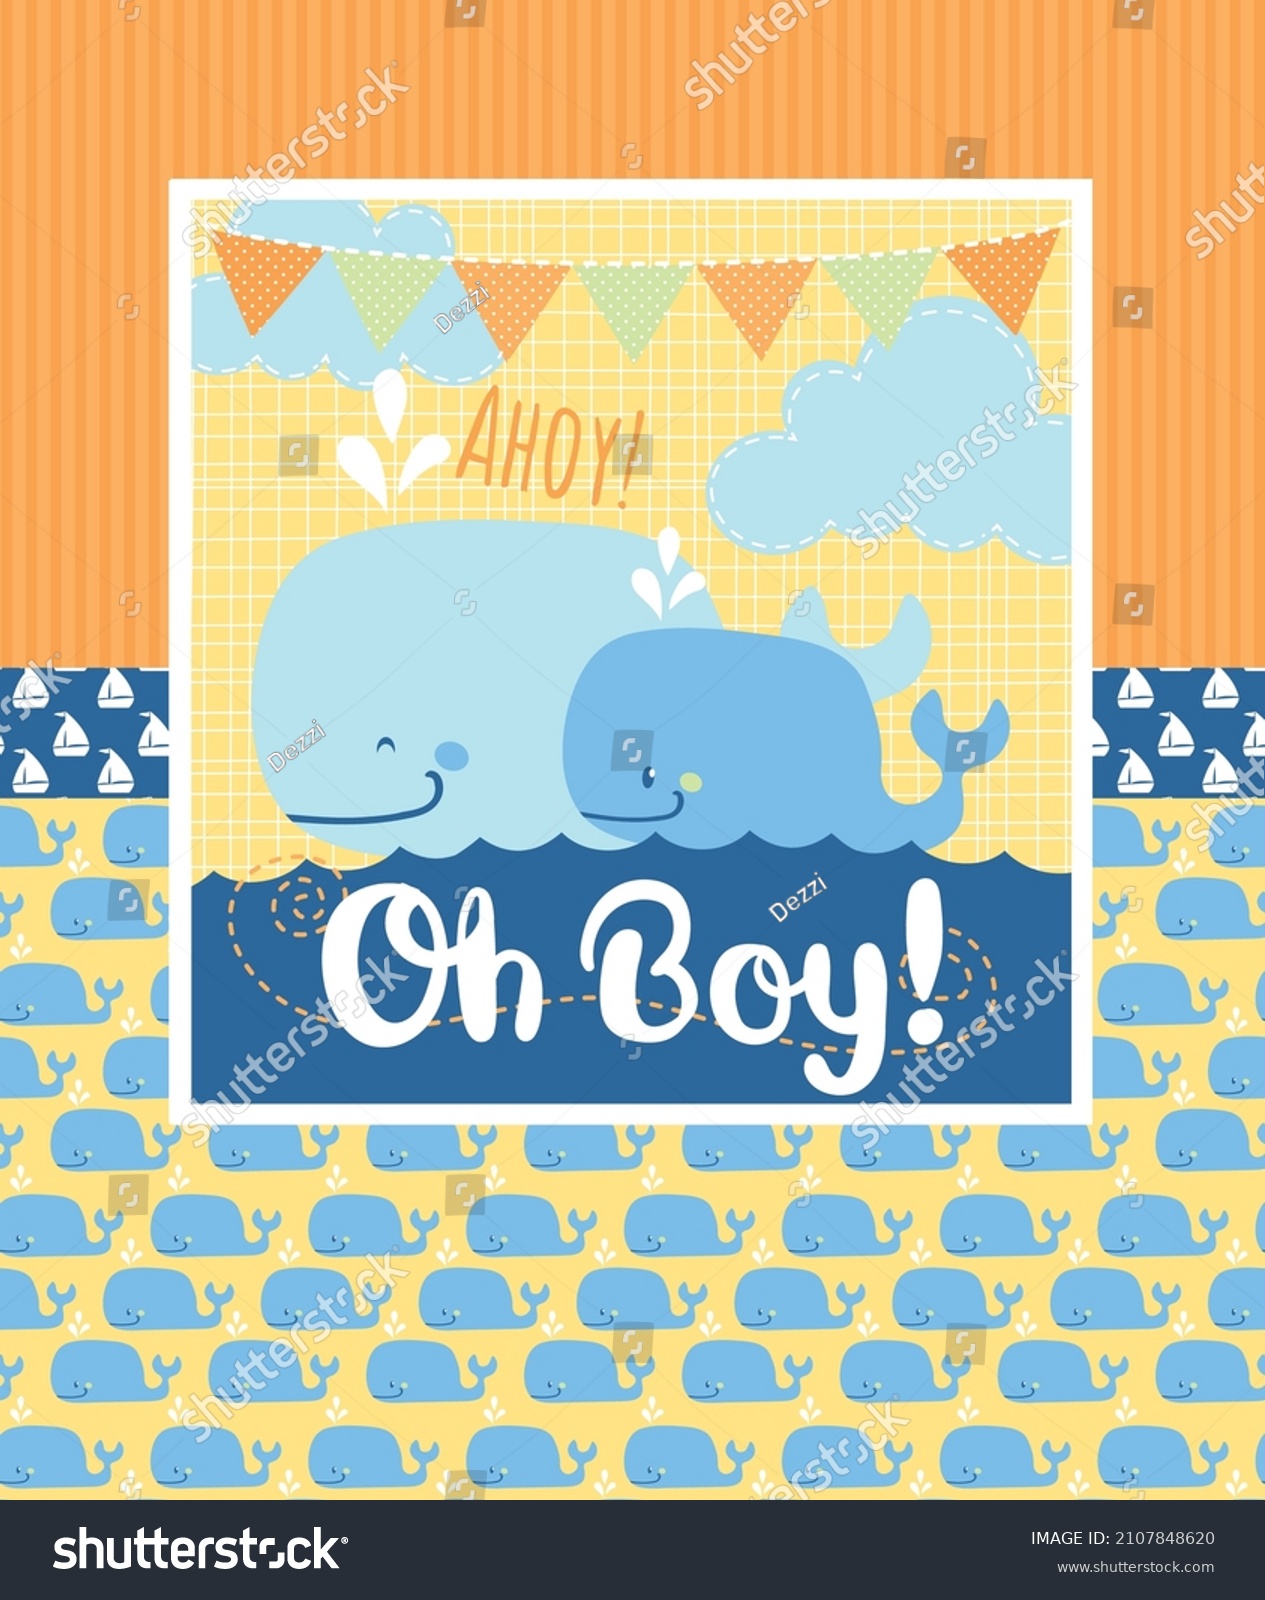 SVG of Ahoy, it's a boy. Vector illustration has multiple vector pattern swatches and nautical scene featuring two cute whale characters. Perfect for baby shower, nursery, or surface designs. svg